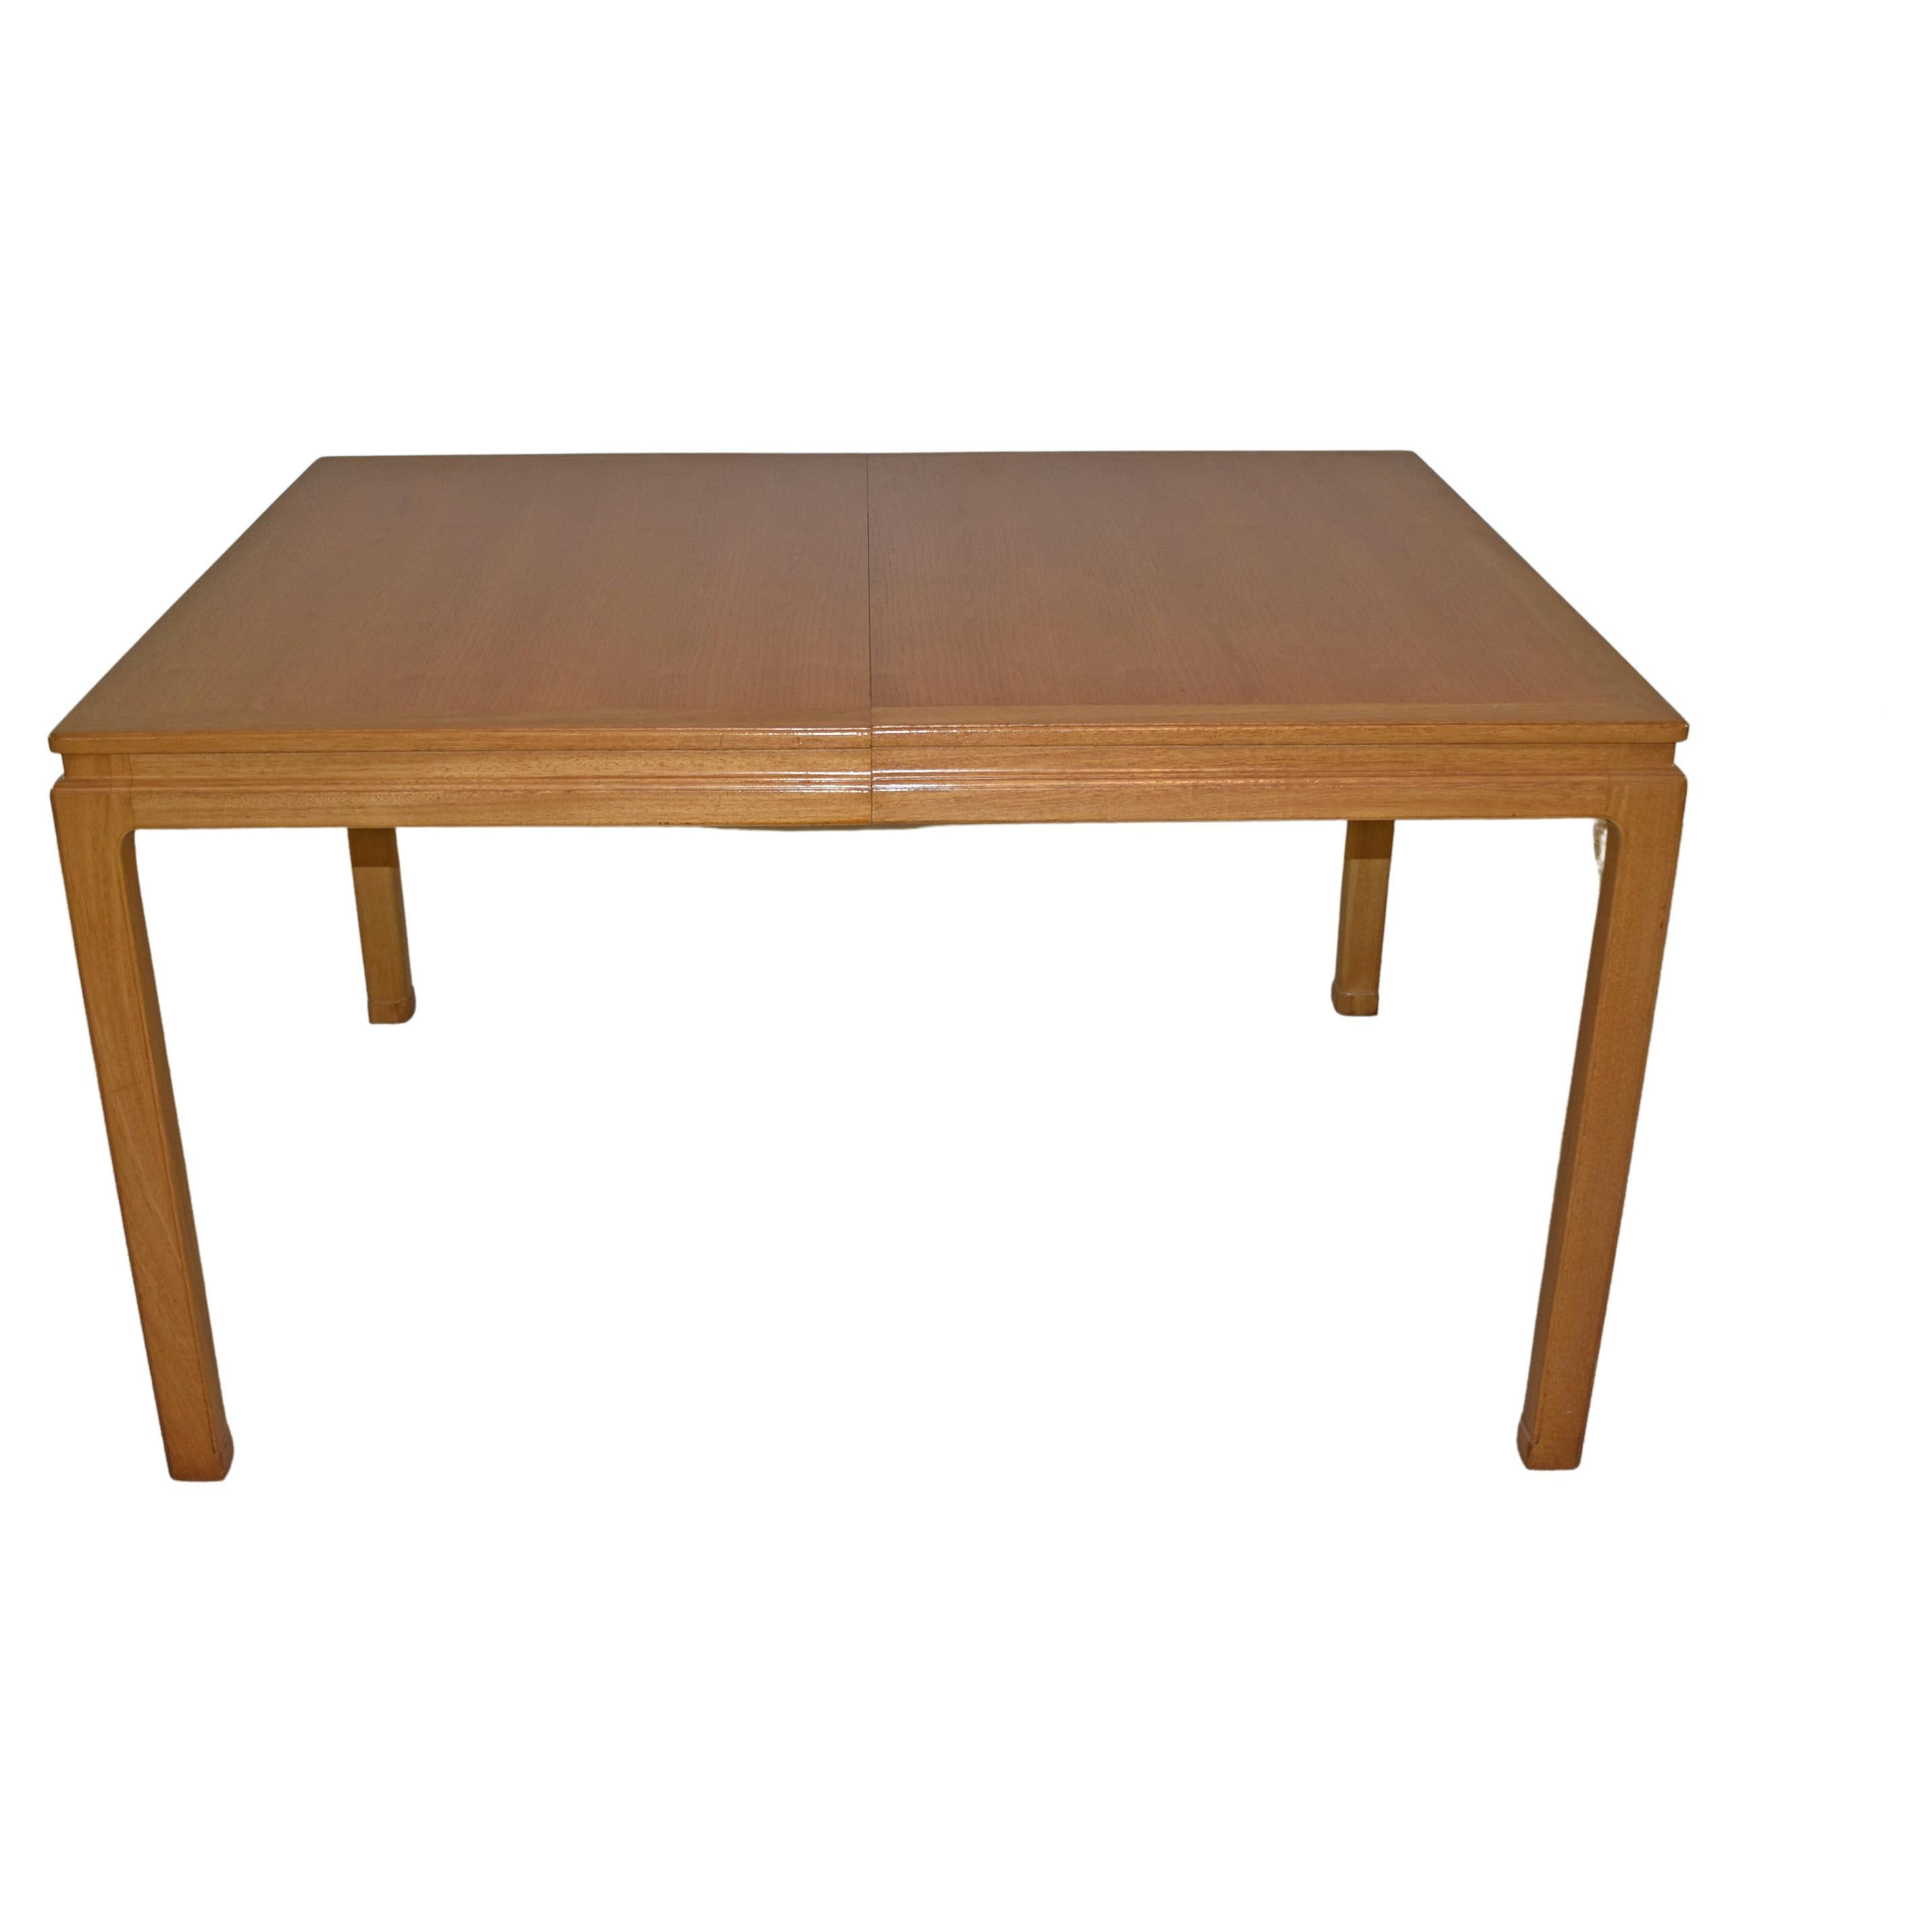 Bleached Mahogany Dining Table with Two Leaves by Edward Wormley for Dunbar